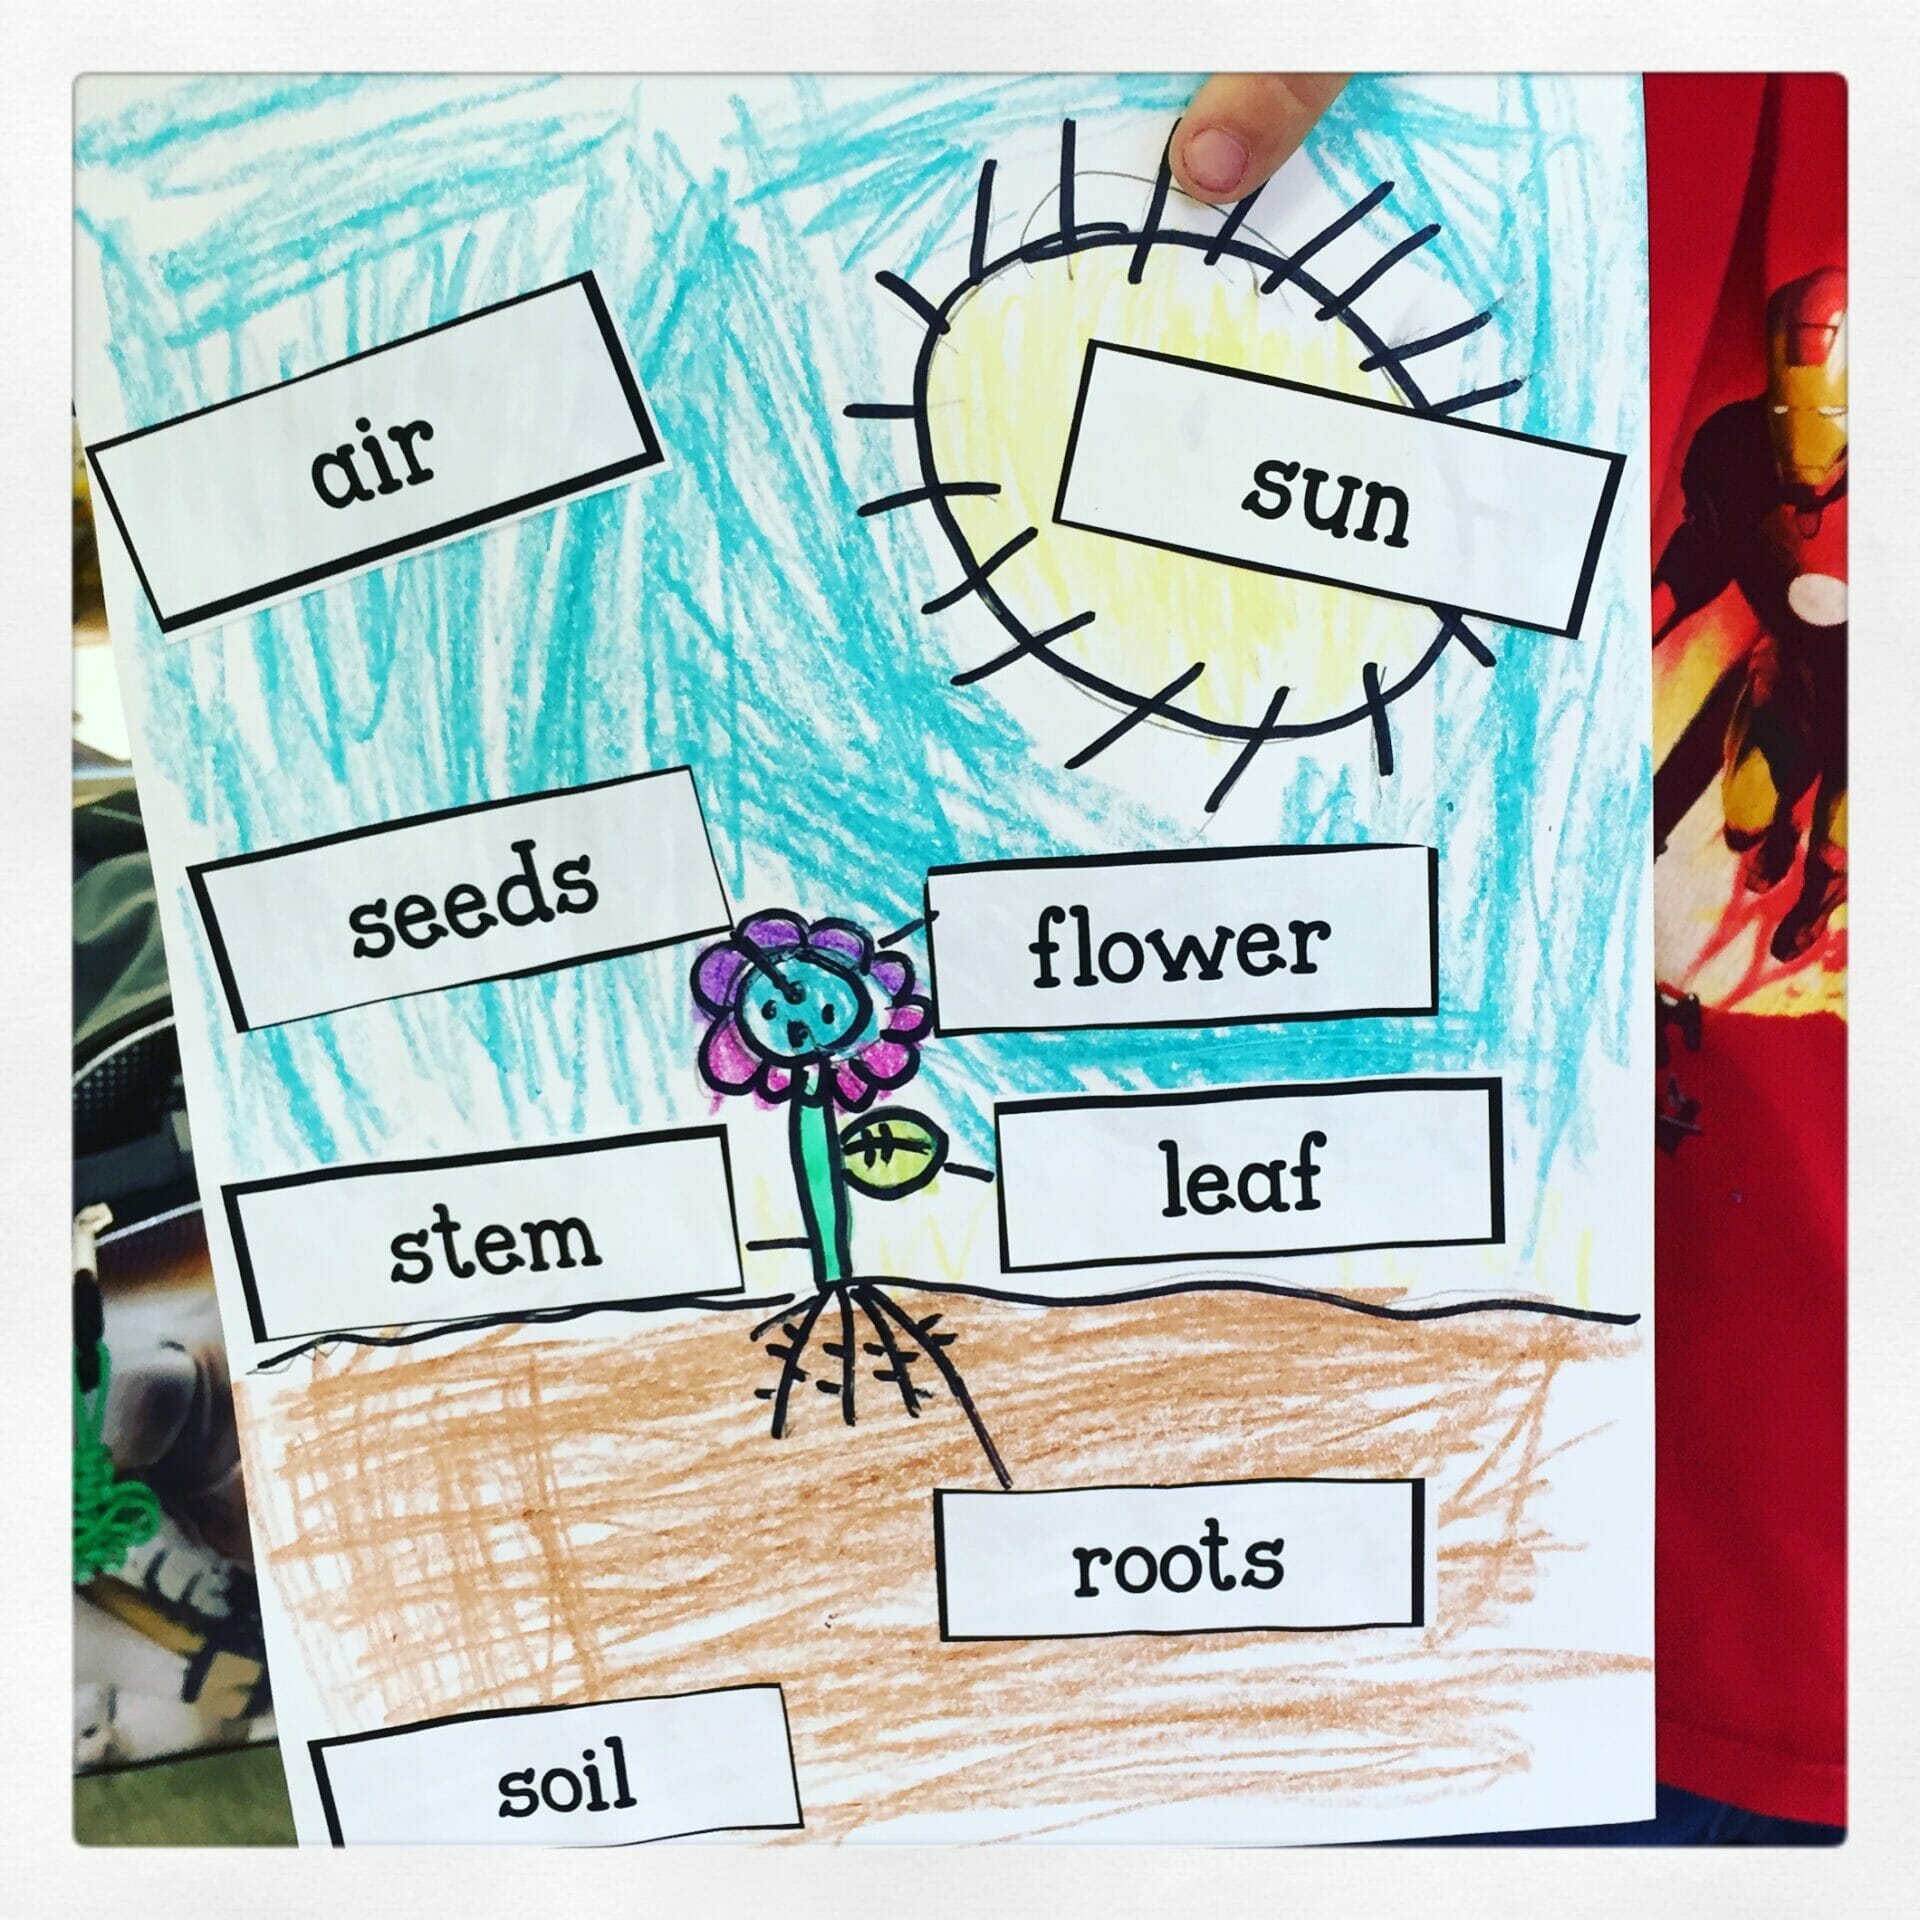 Naming Parts Of A Flower Activity | Early Years Resources